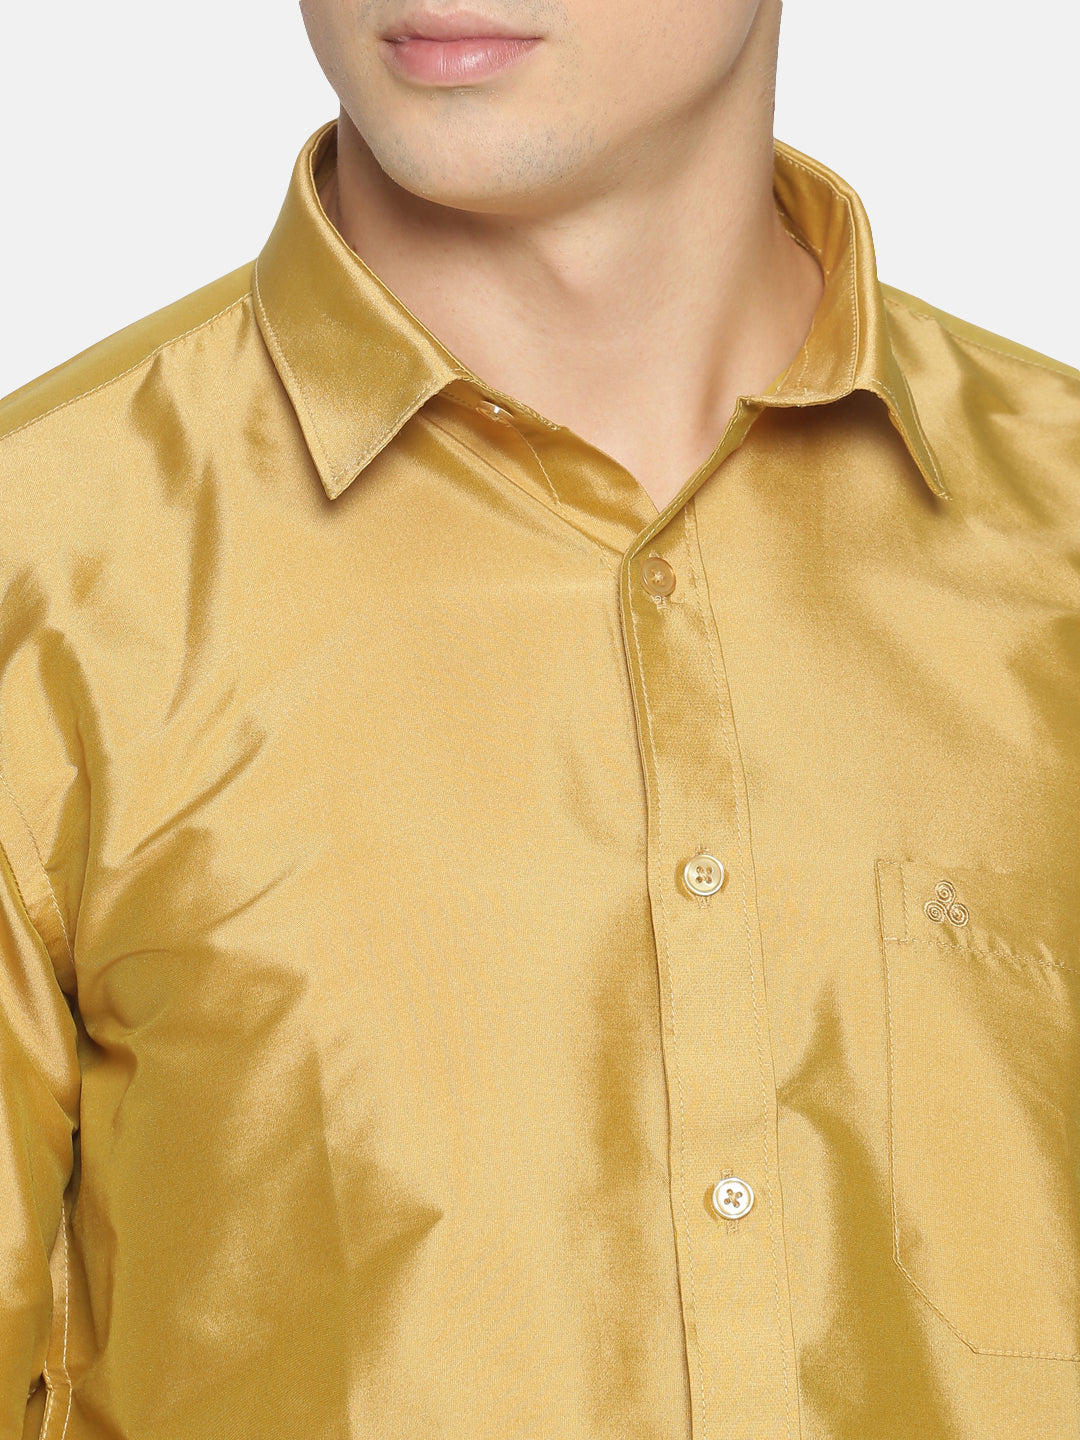 Gold-Toned Polyester Slim Fit Shirt